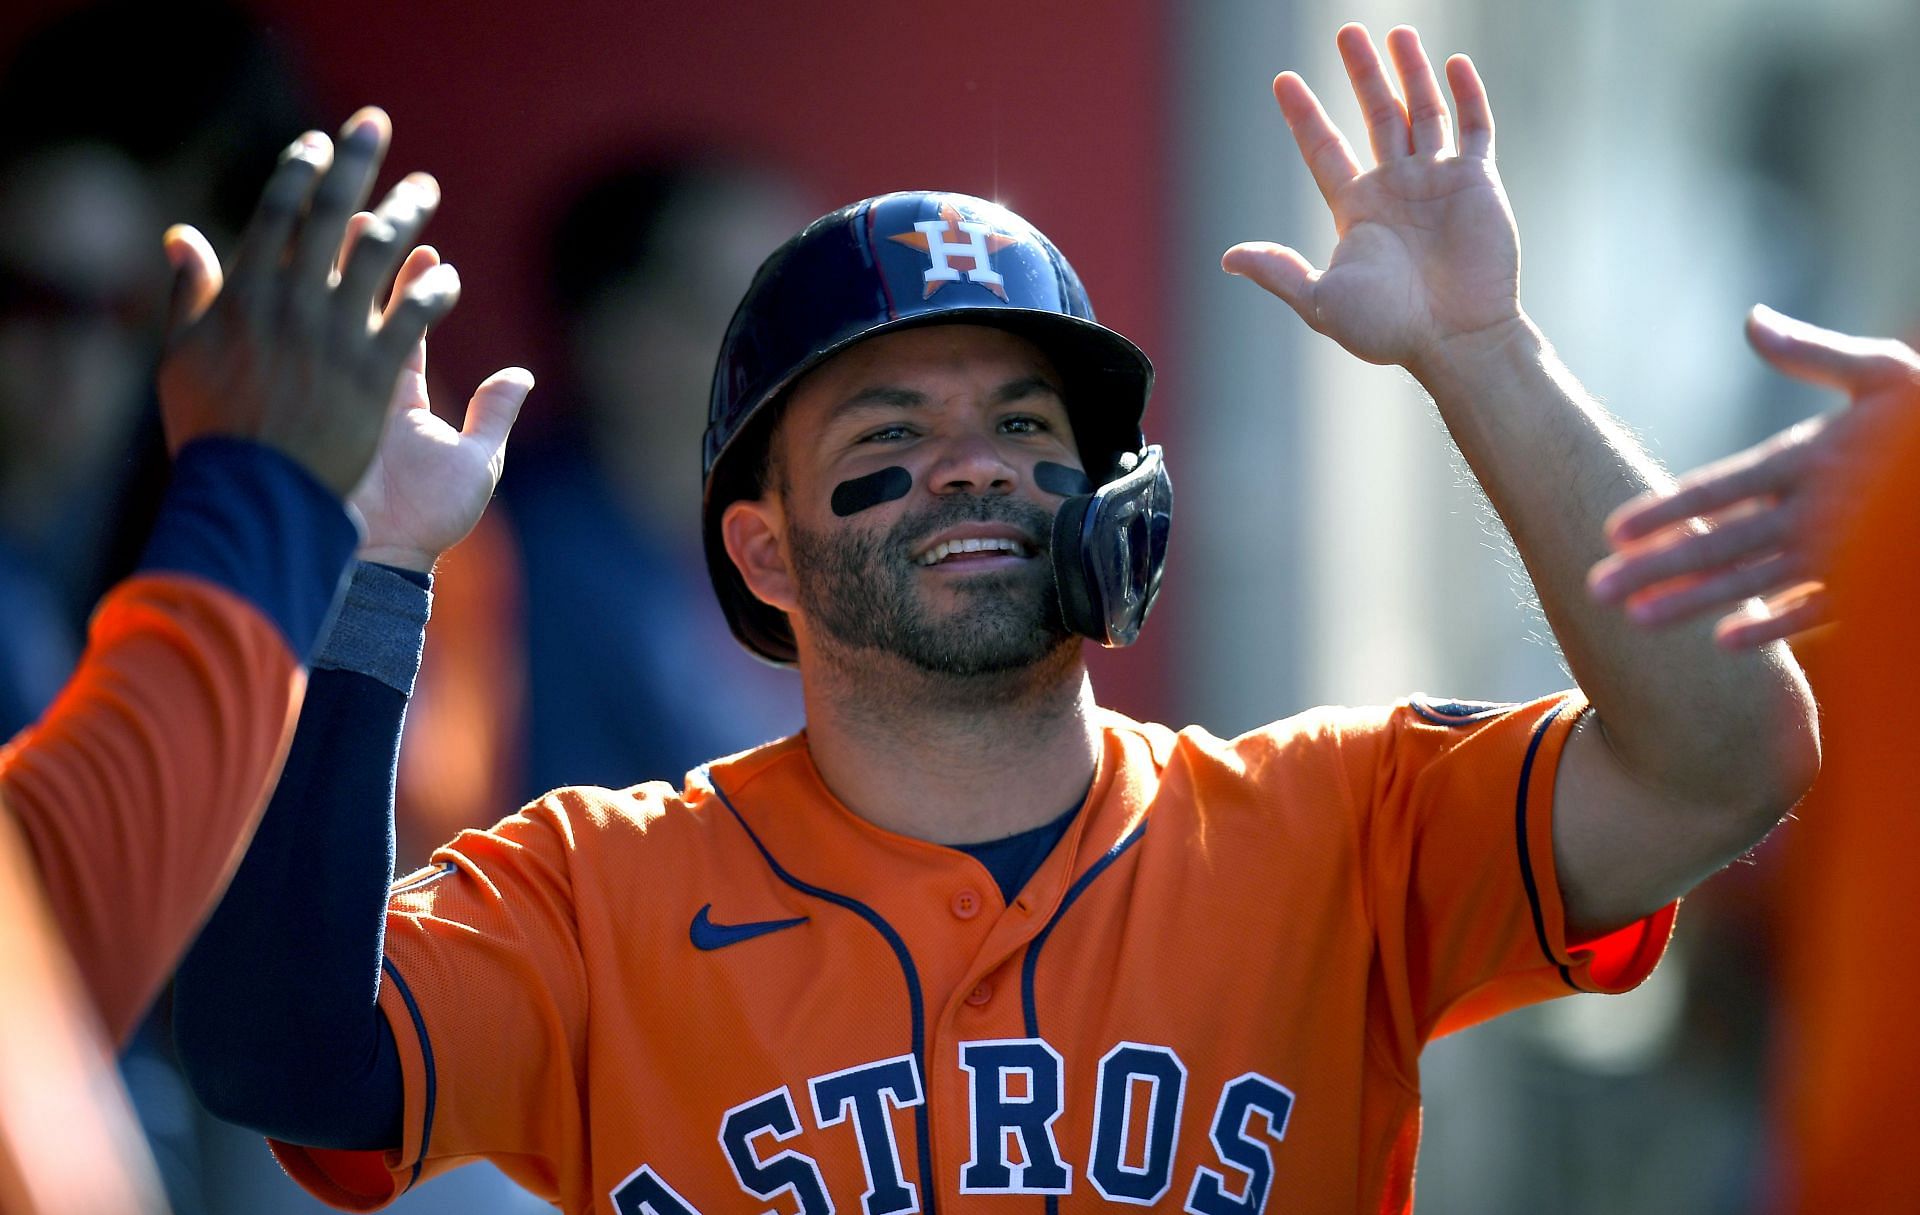 Jose Altuve celebrates during a MLB Houston Astros v Los Angeles Angels game earlier this season.